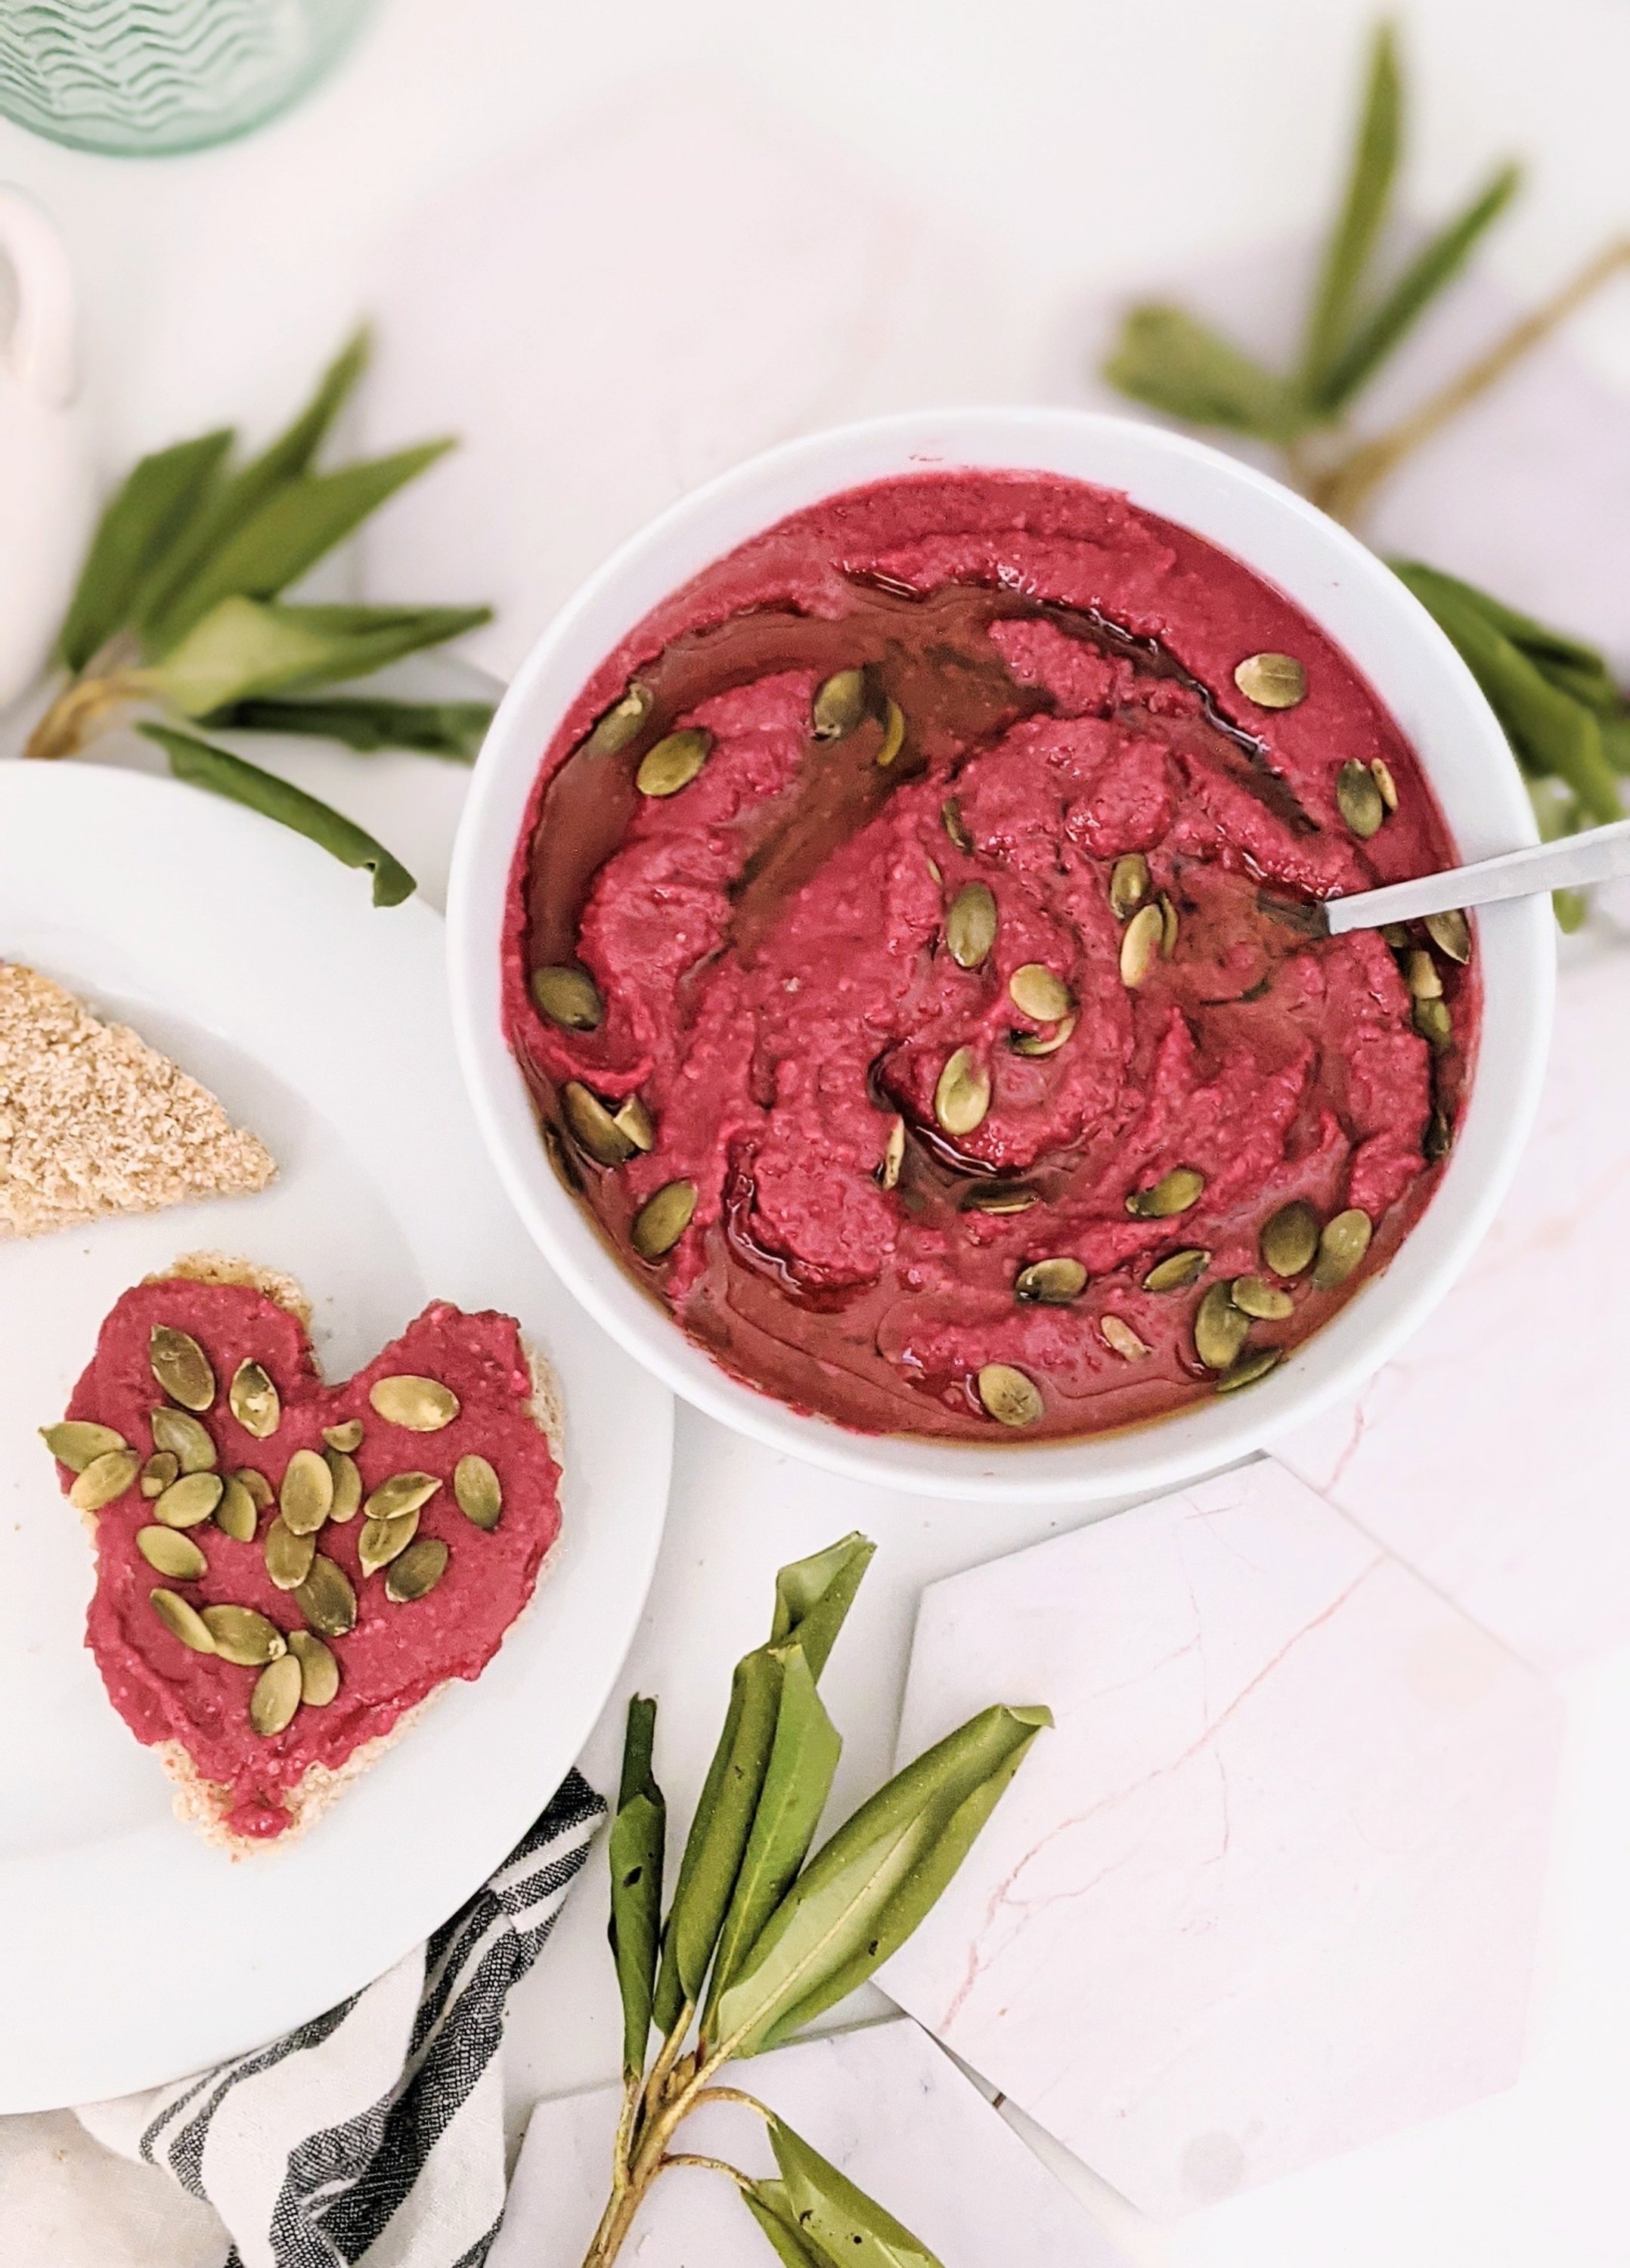 hummus with beet powder recipes ideas with beetroot healthy beet hummus vegan vegatarian snack ideas with beets gluten free dairy free high protein beet dip